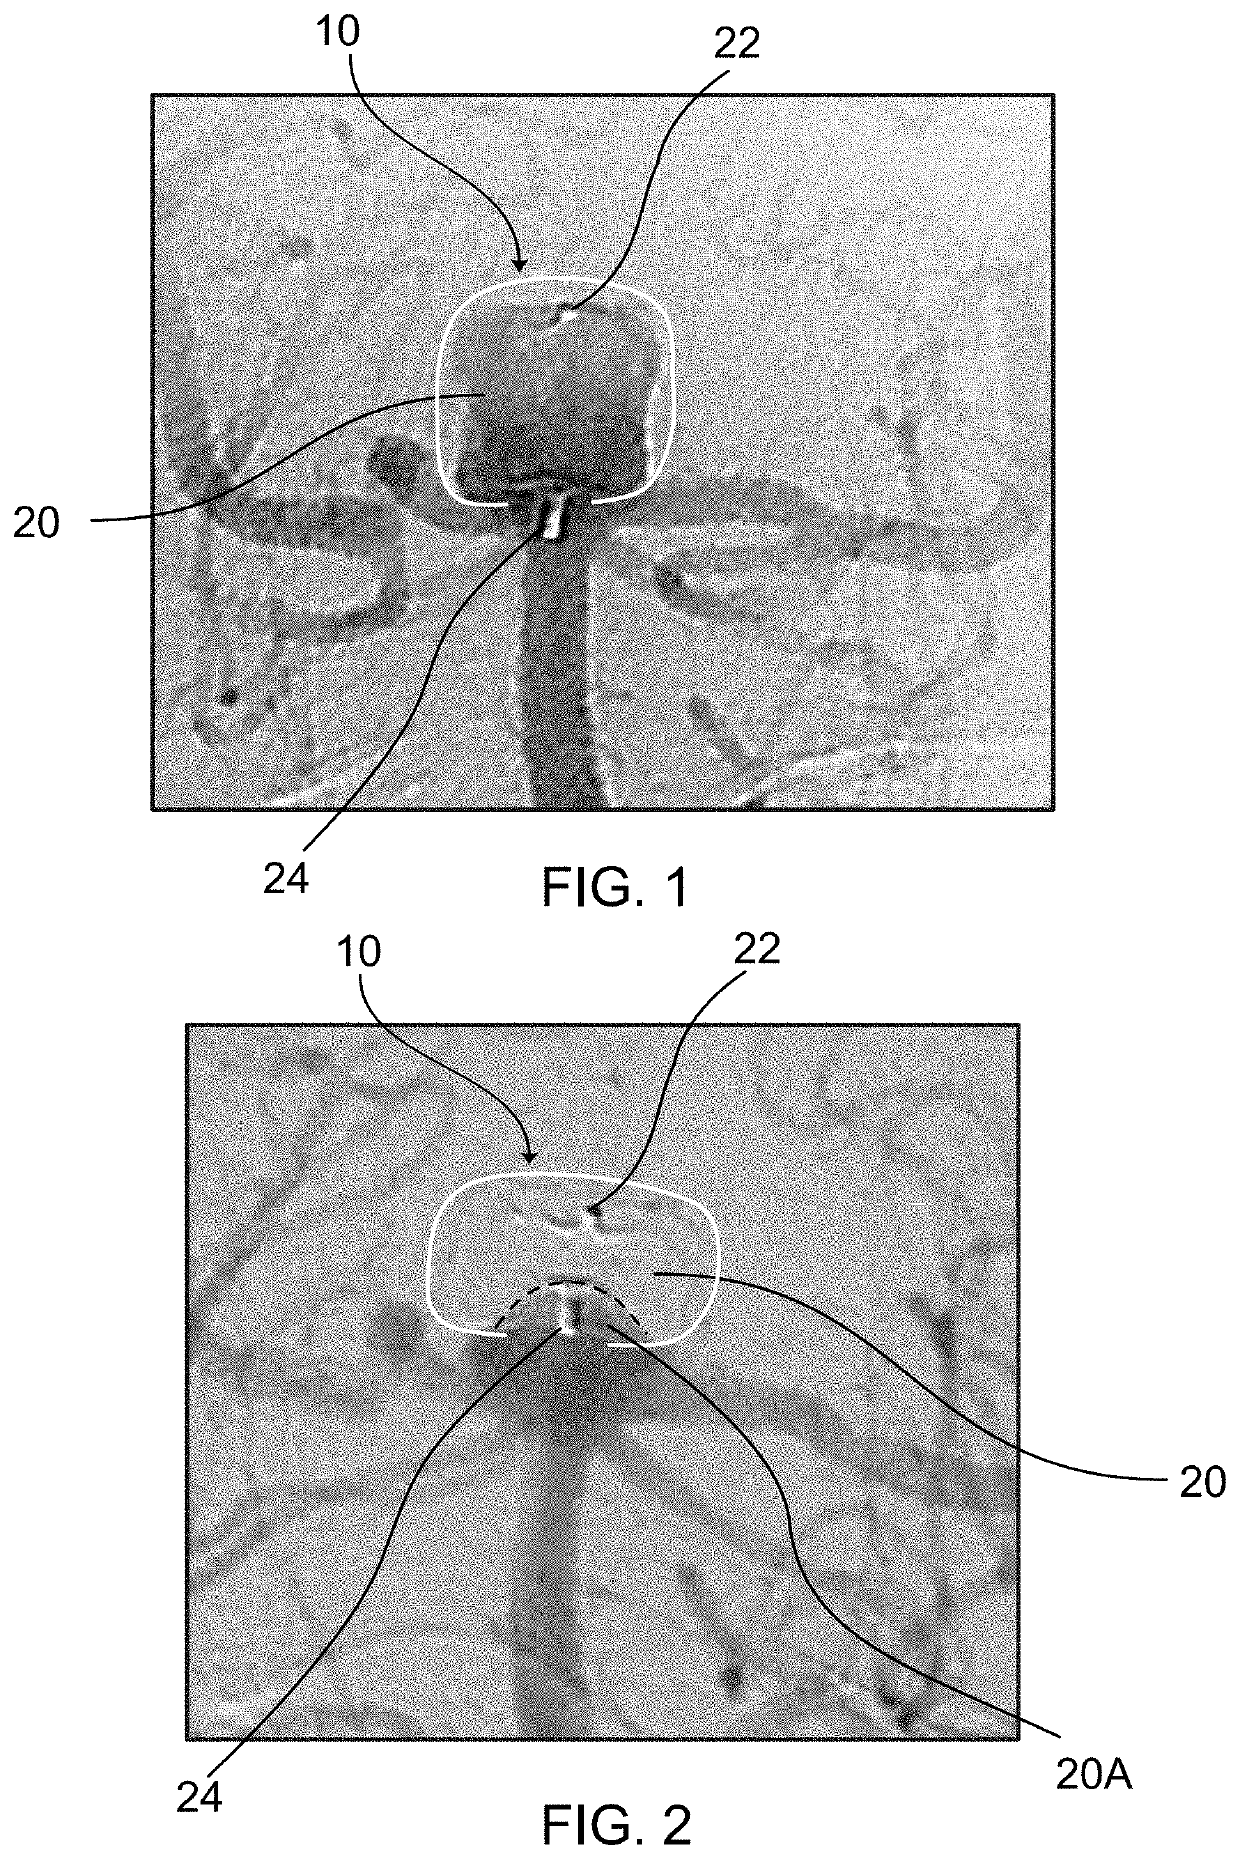 Medical Devices With Sensing Characteristics For Intravascular Treatment Sites And Methods Thereof